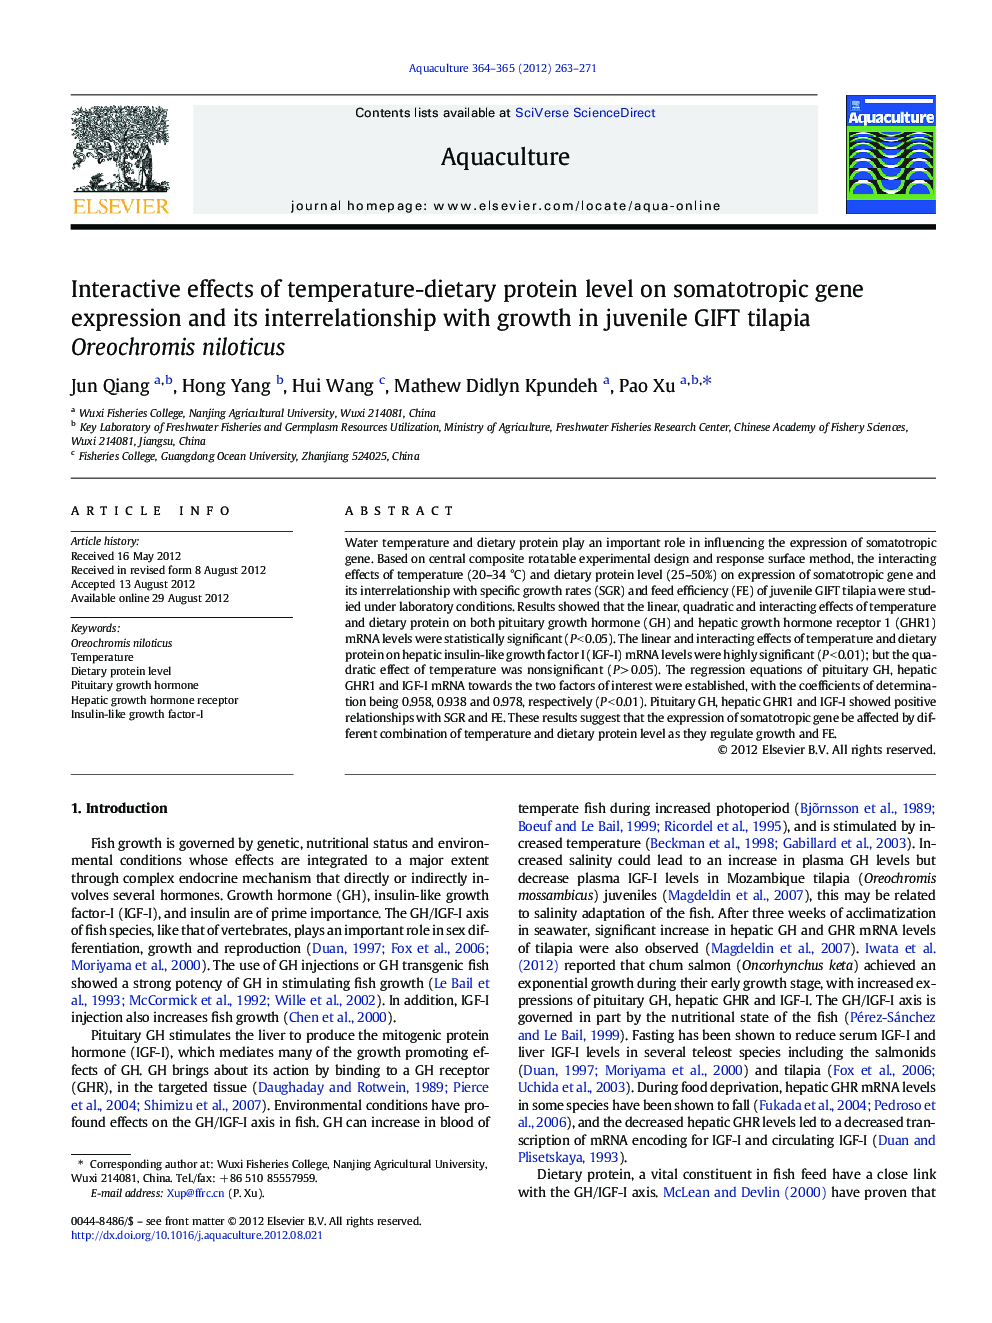 Interactive effects of temperature-dietary protein level on somatotropic gene expression and its interrelationship with growth in juvenile GIFT tilapia Oreochromis niloticus